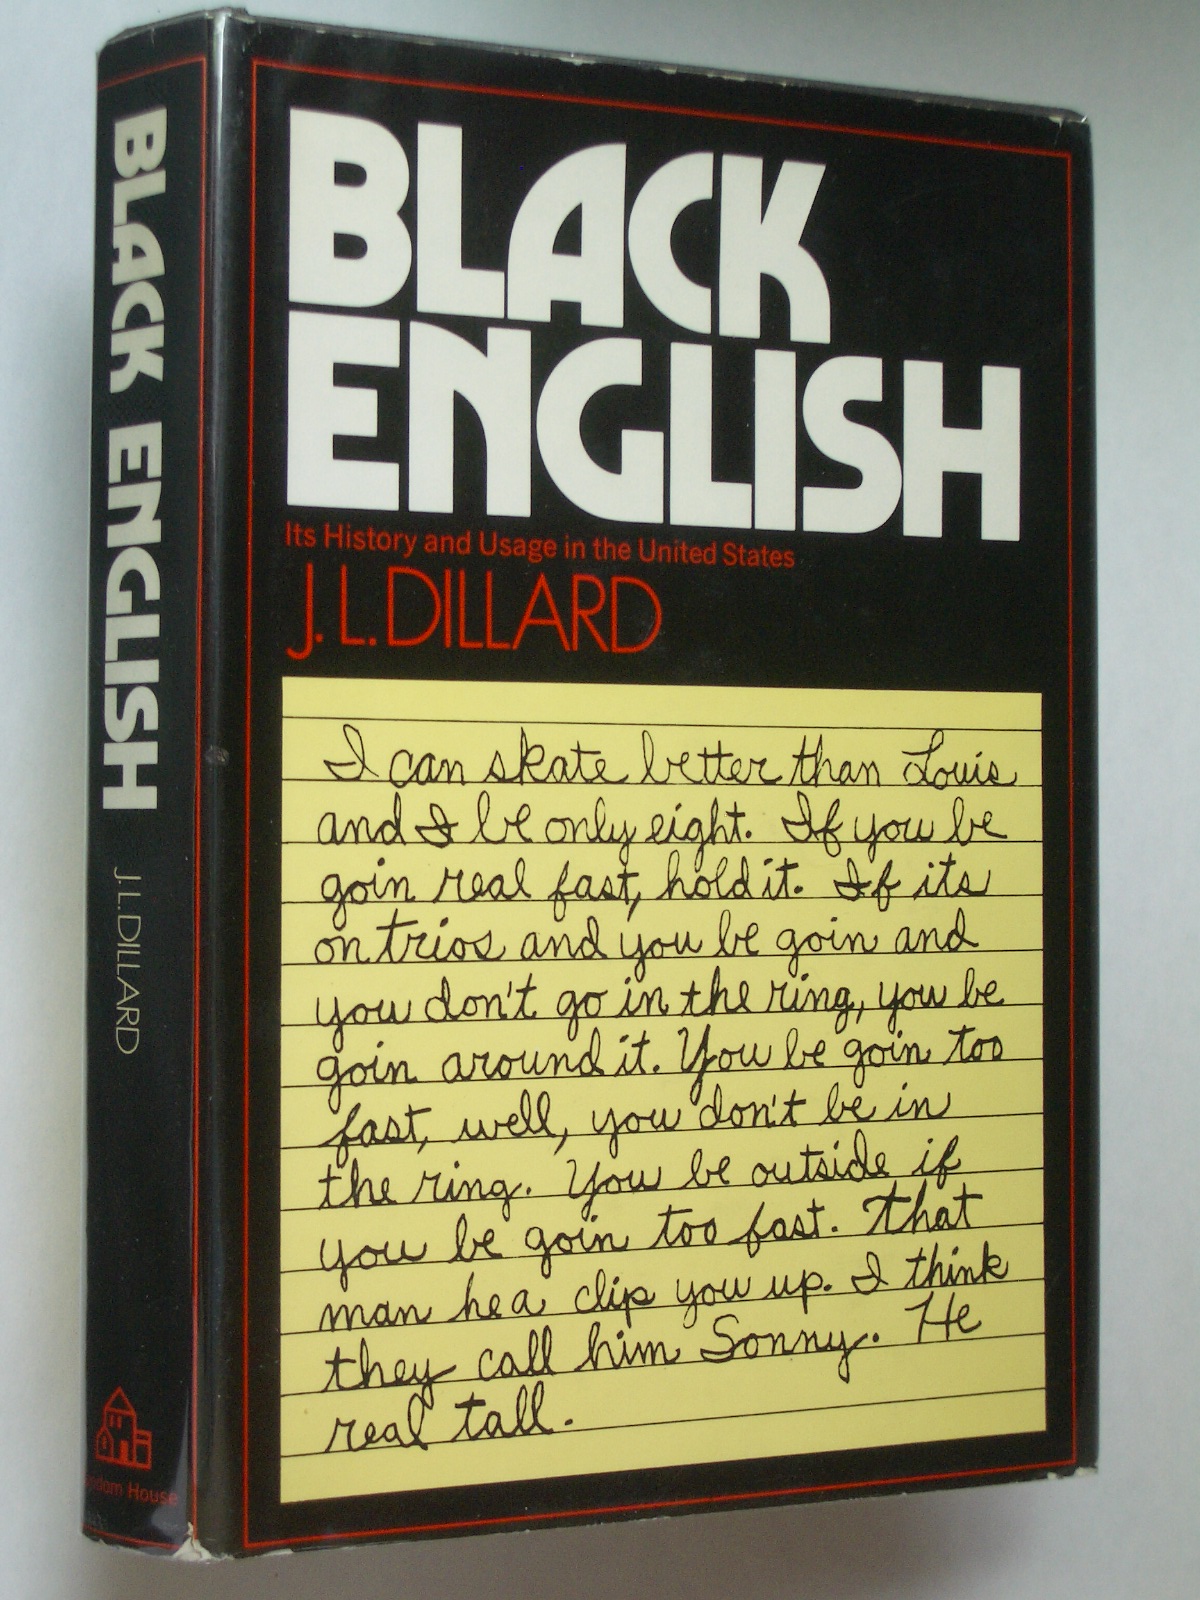 Black English: Its History and Usage in the United States - Dillard, J. L.